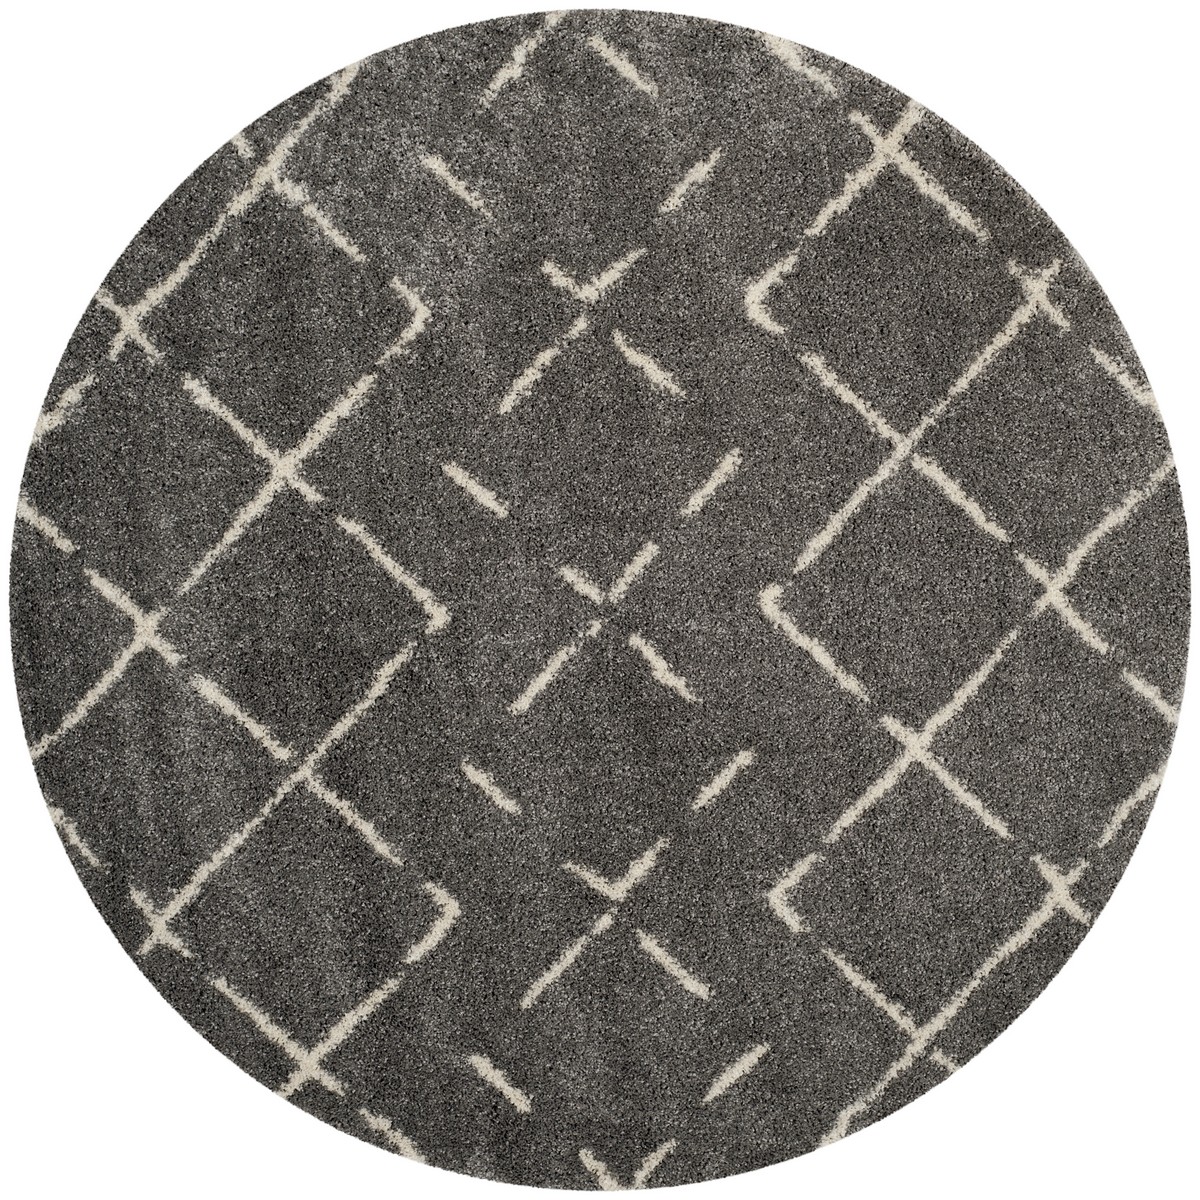 Asg743b-7r Arizona Shag Power Loomed Round Area Rug, Brown & Ivory - 6 Ft.-7 In. X 6 Ft.-7 In.